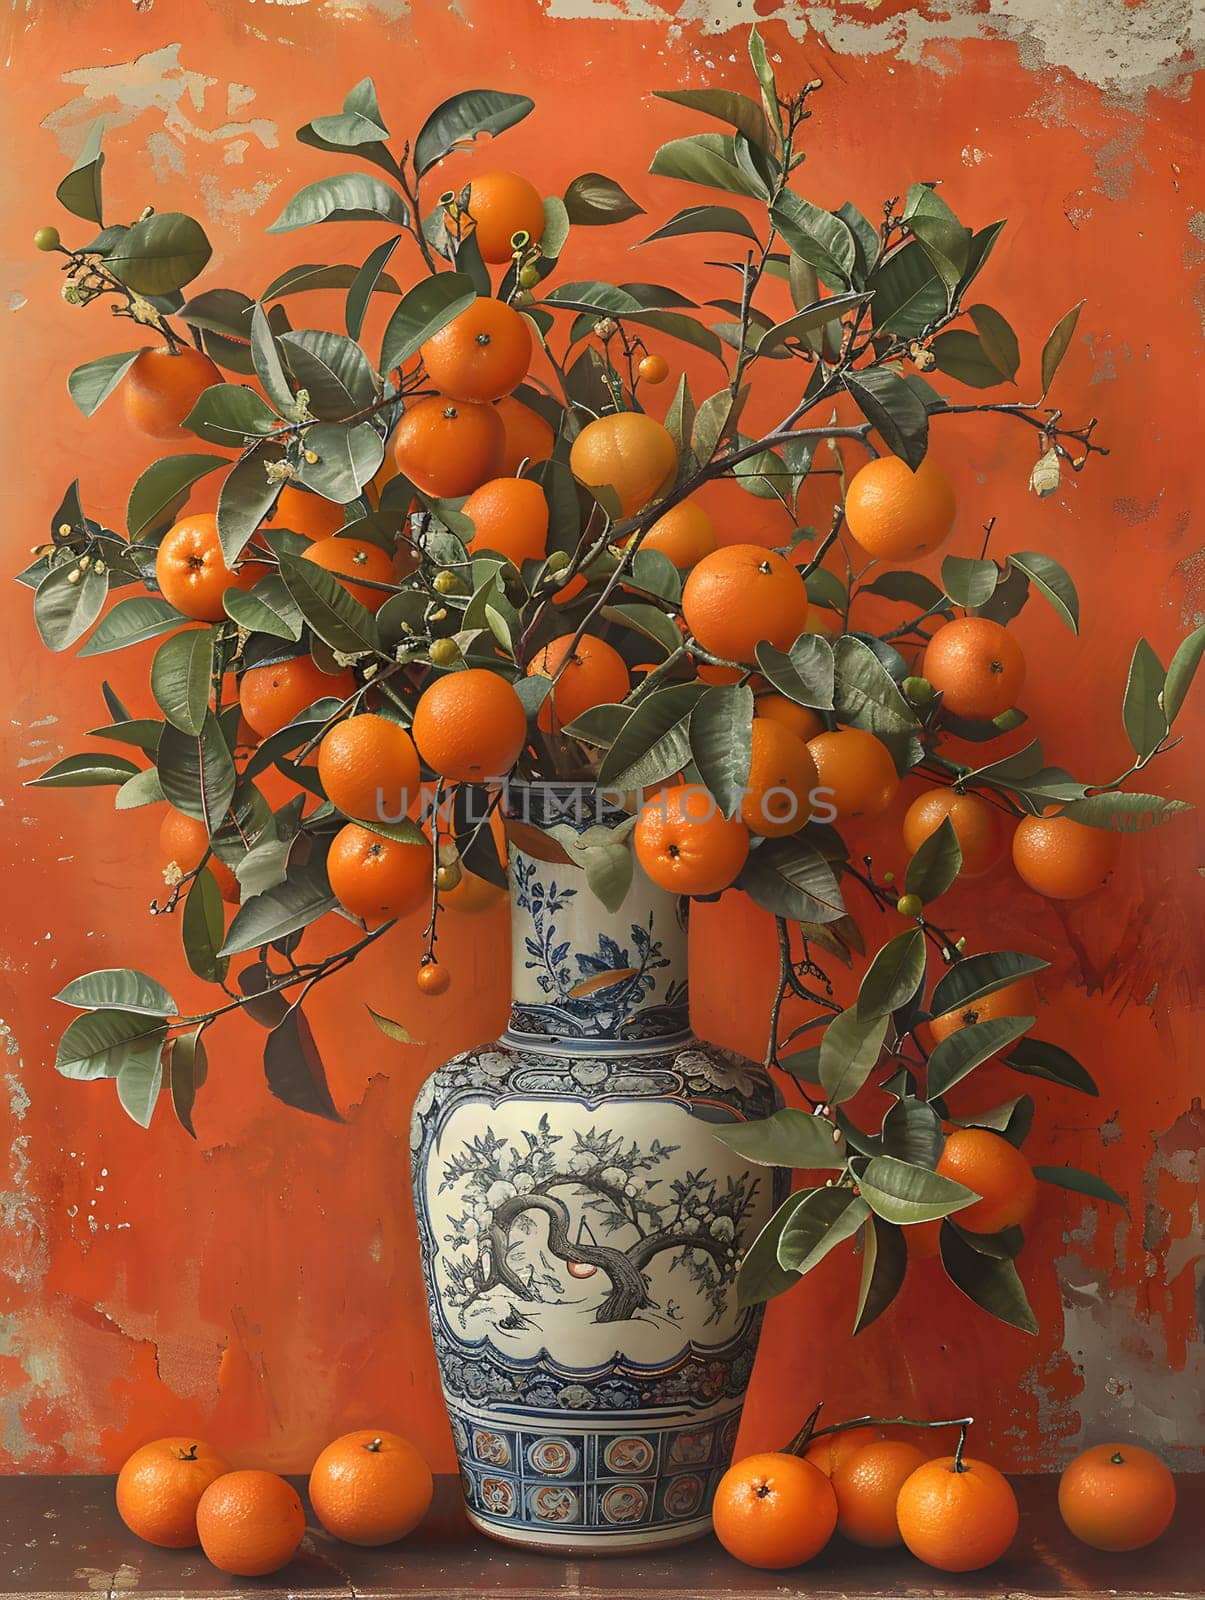 A citrusthemed display featuring a blue and white vase filled with various oranges including Rangpur, Clementine, Tangerine, and Bitter orange, placed in front of an orange wall